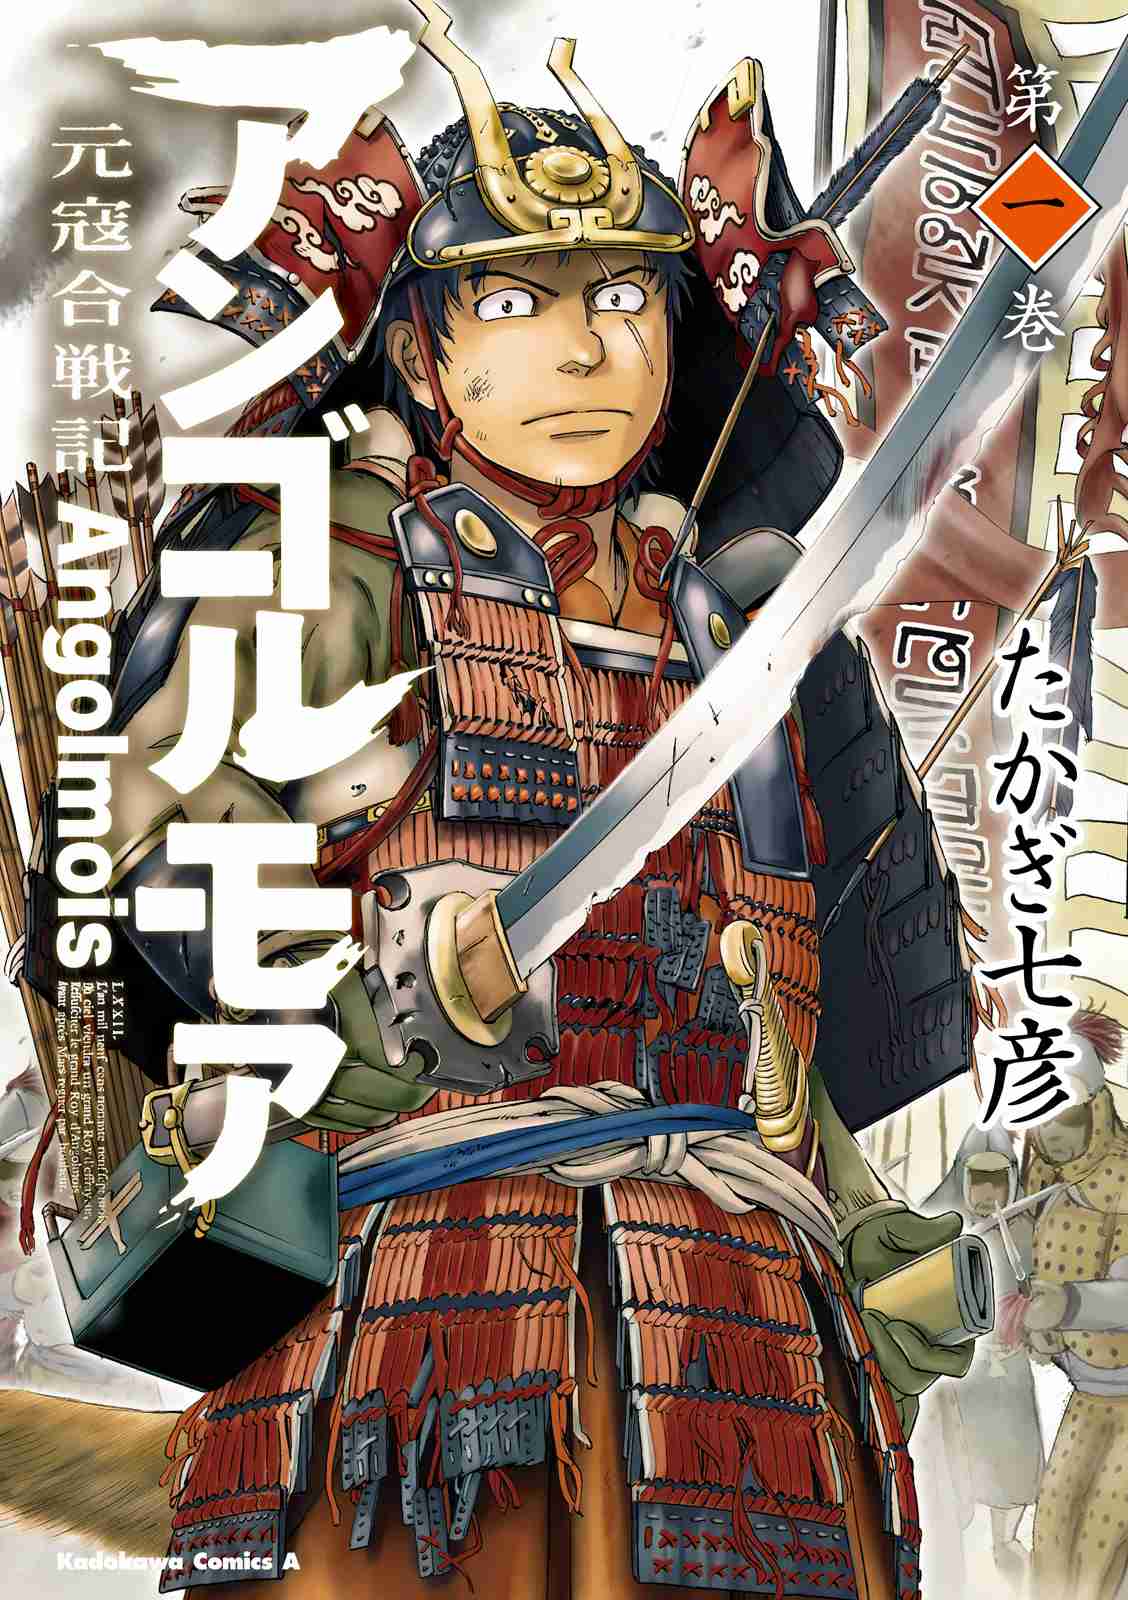 Angolmois Record of the Mongol Invasion of Japan Vol. 1 Ch. 1